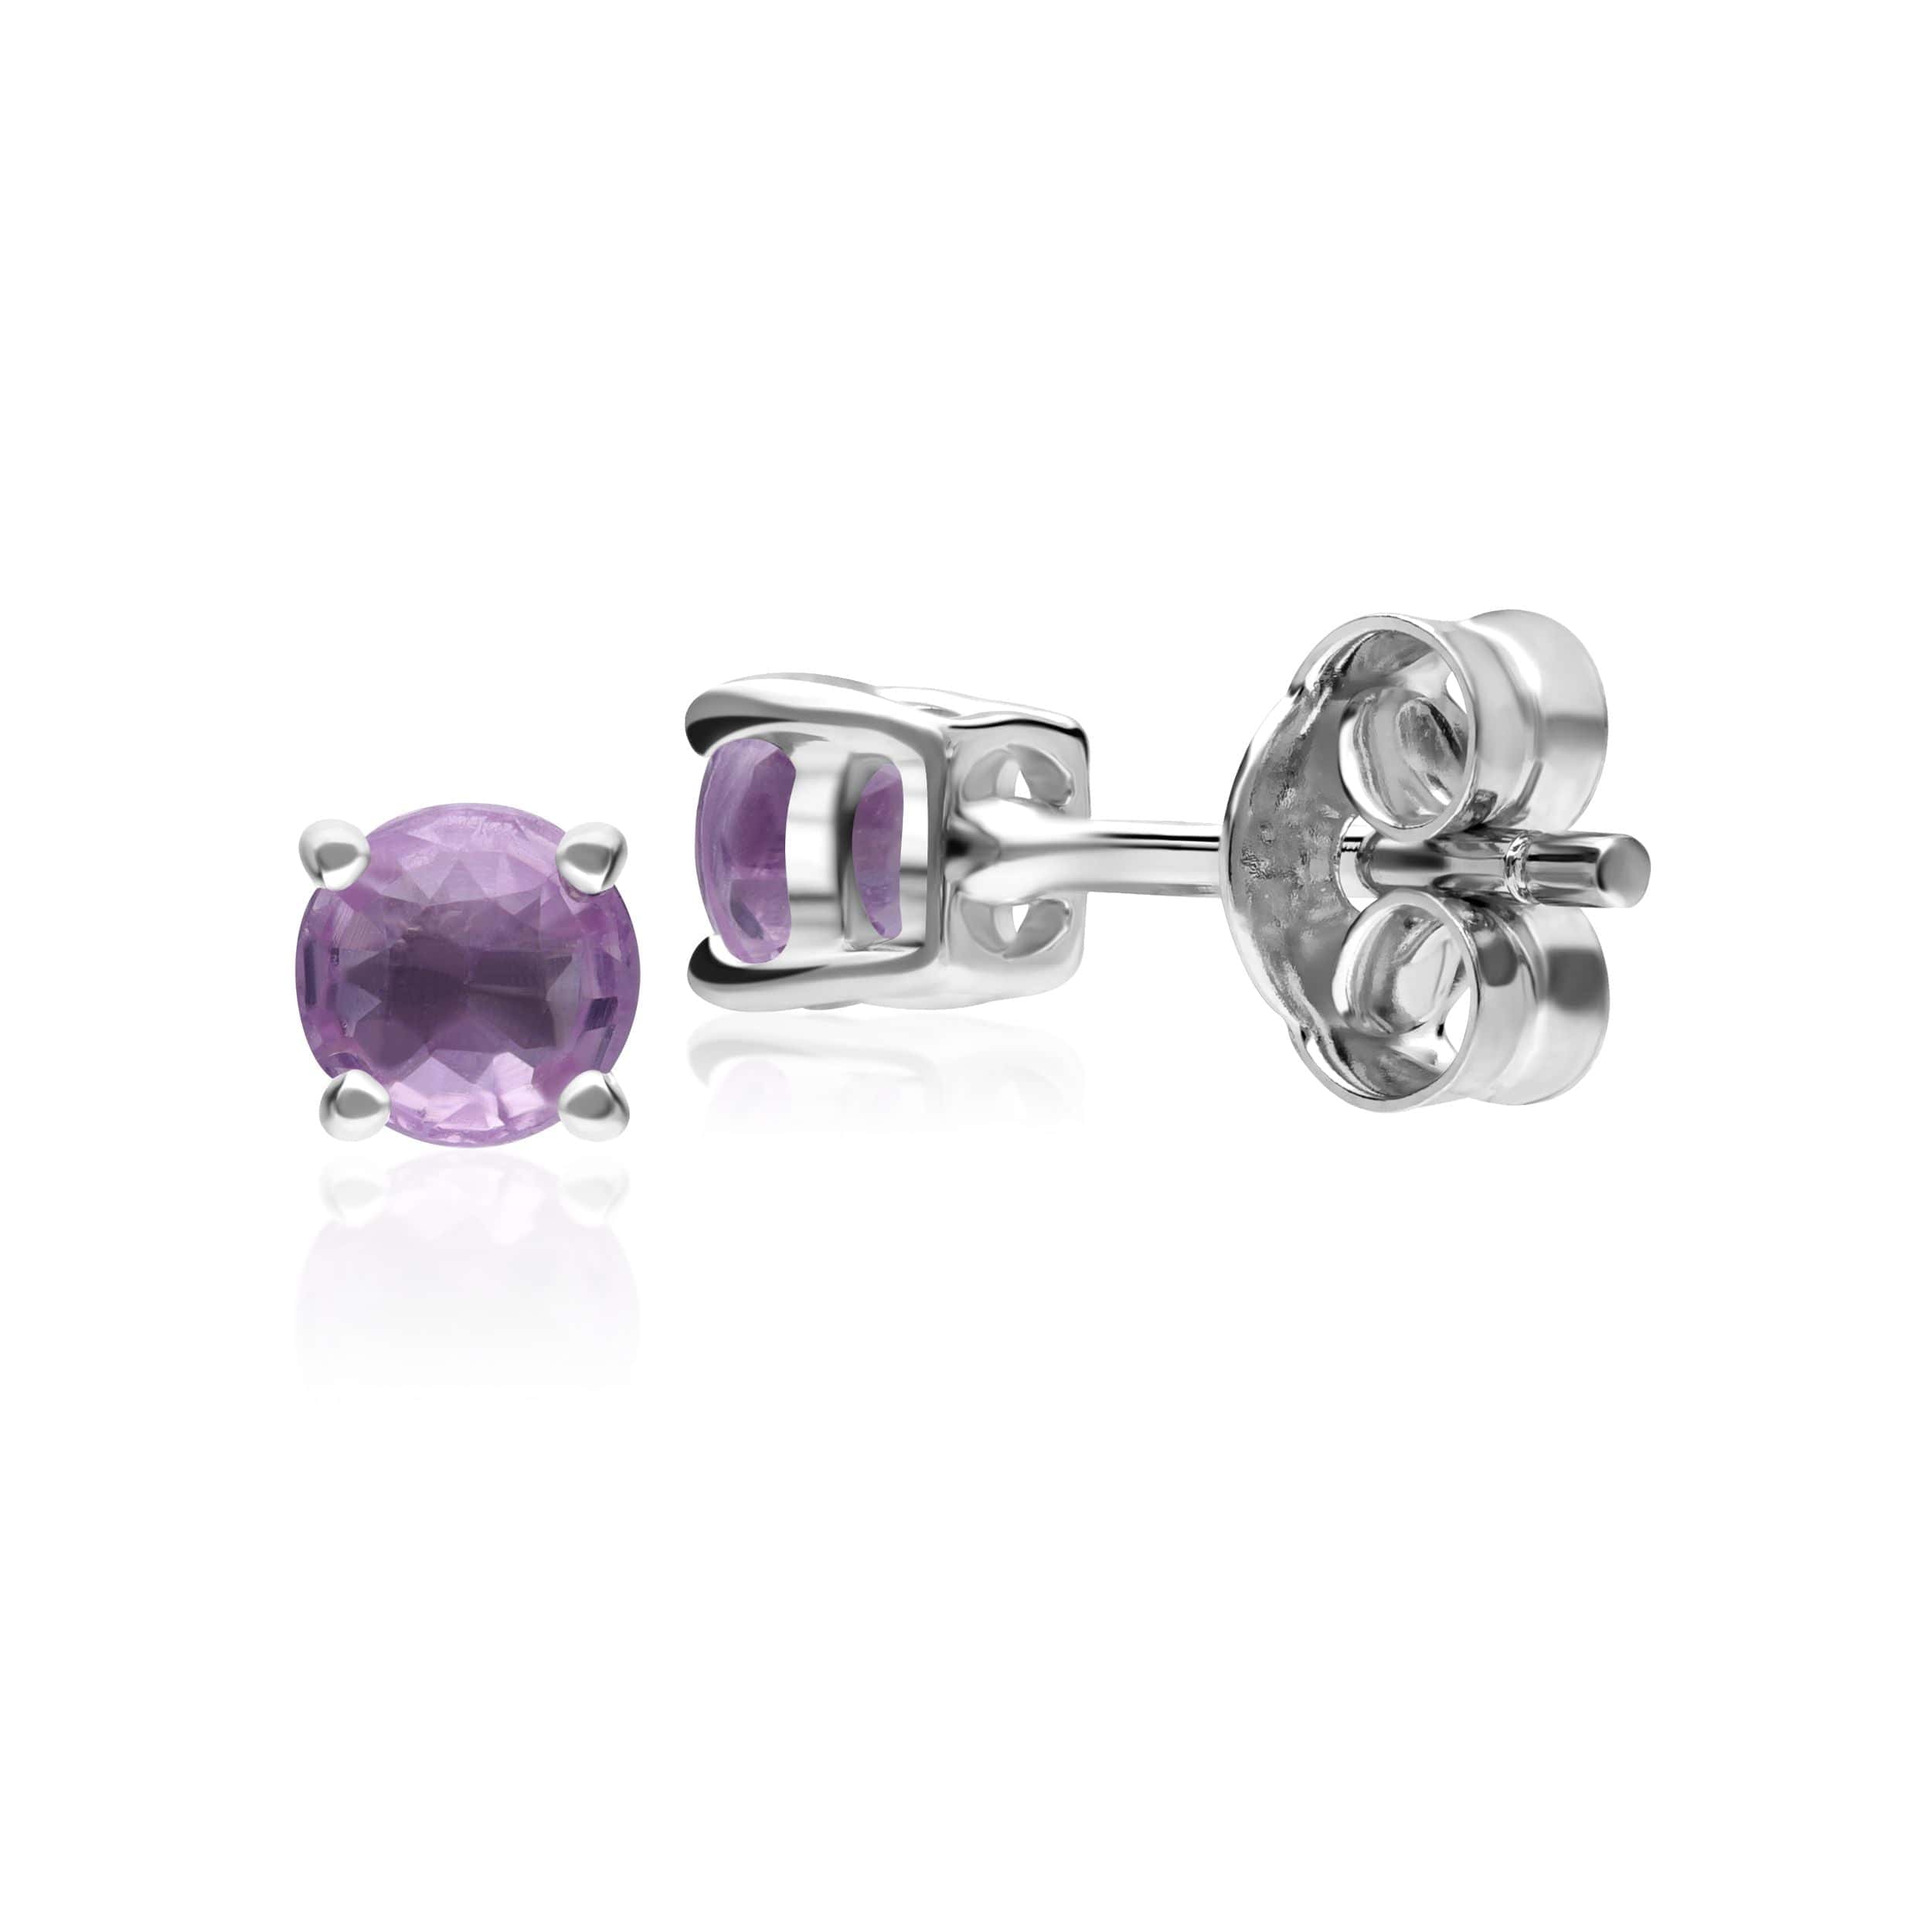 117E0031159 Classic Round Pink Sapphire Stud Earrings in 9ct White Gold 3.5mm 2